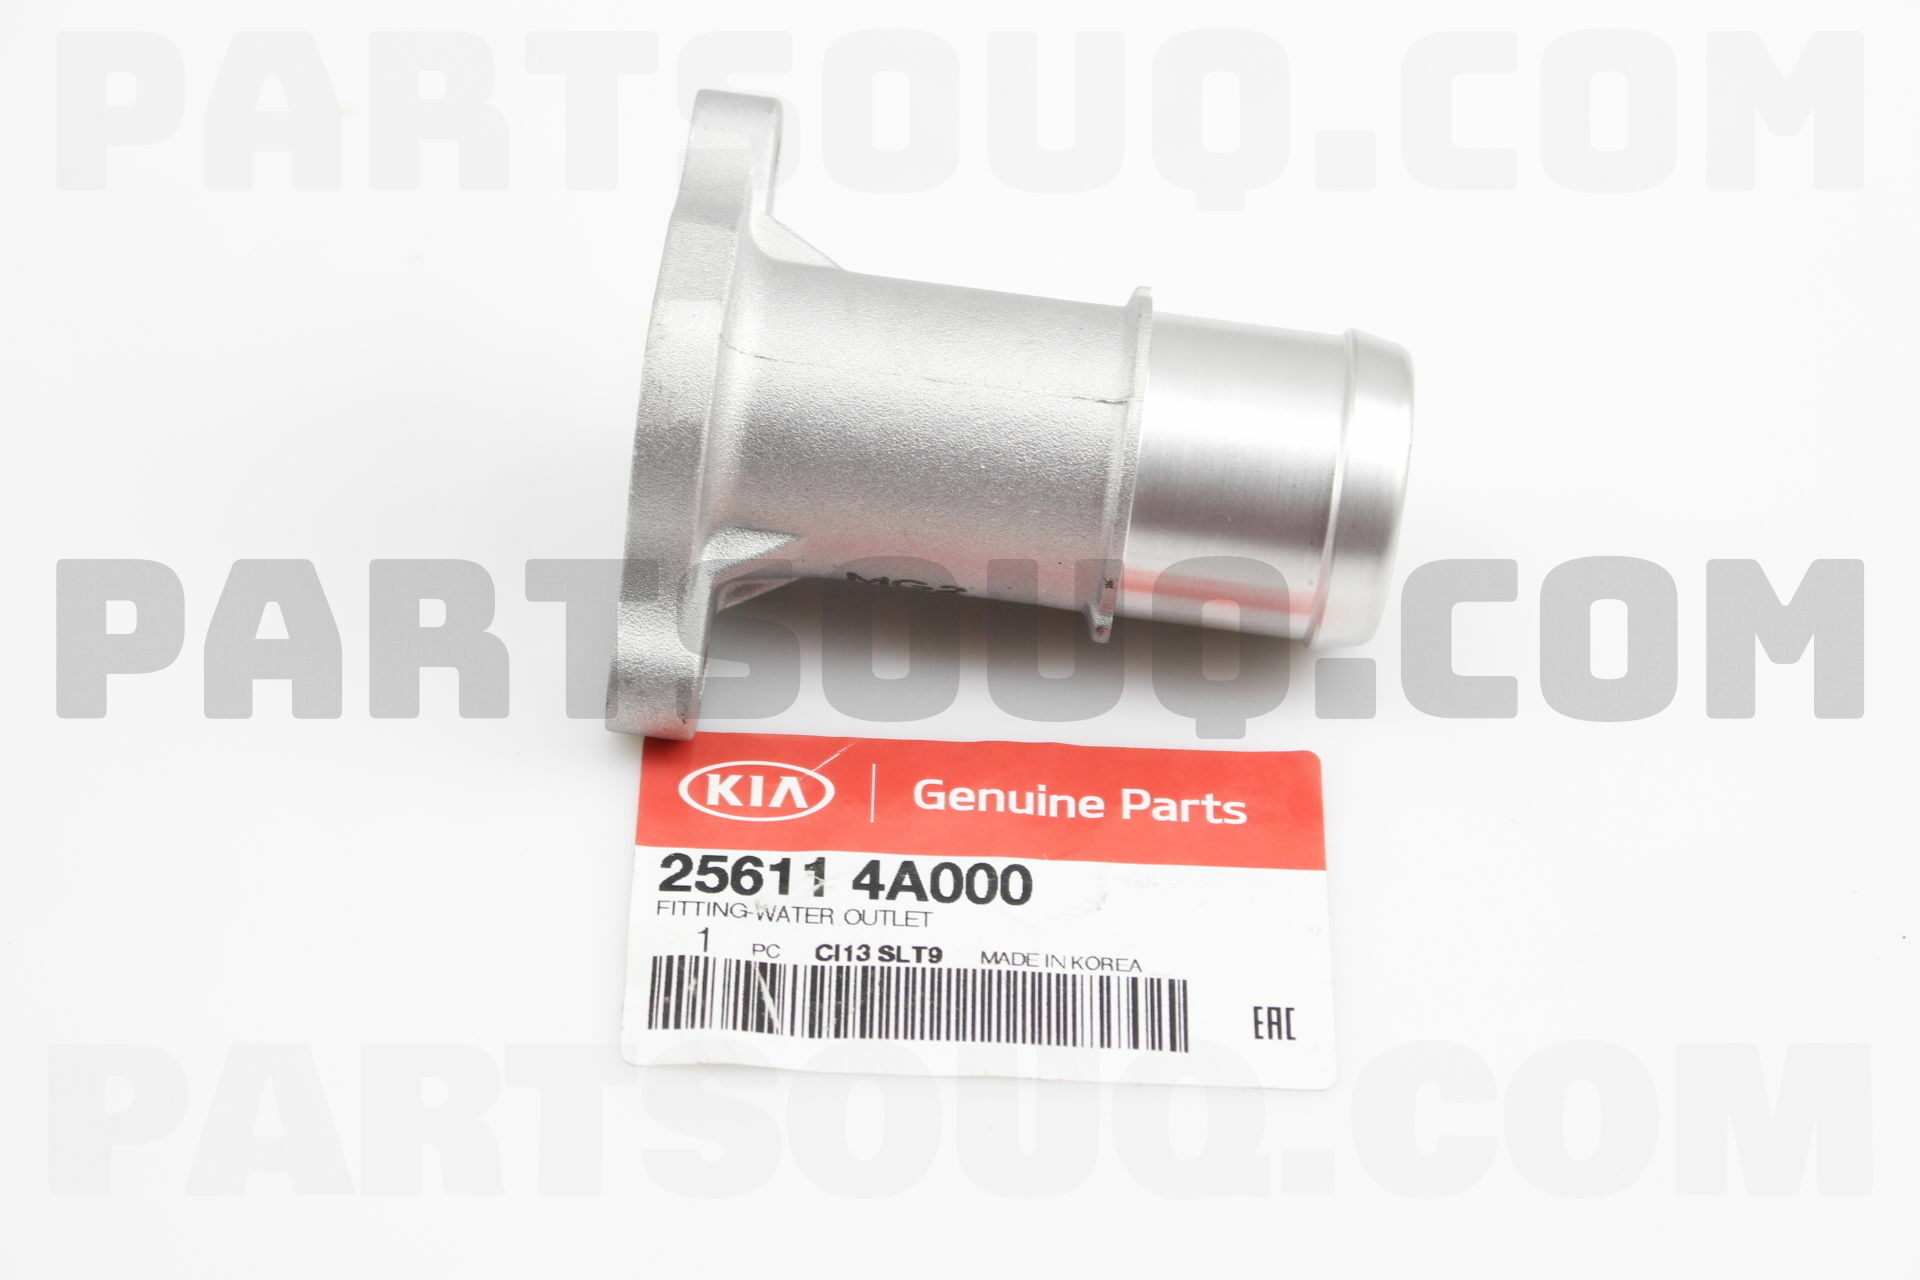 HYUNDAI Genuine 25611-3E001 Water Outlet Fitting